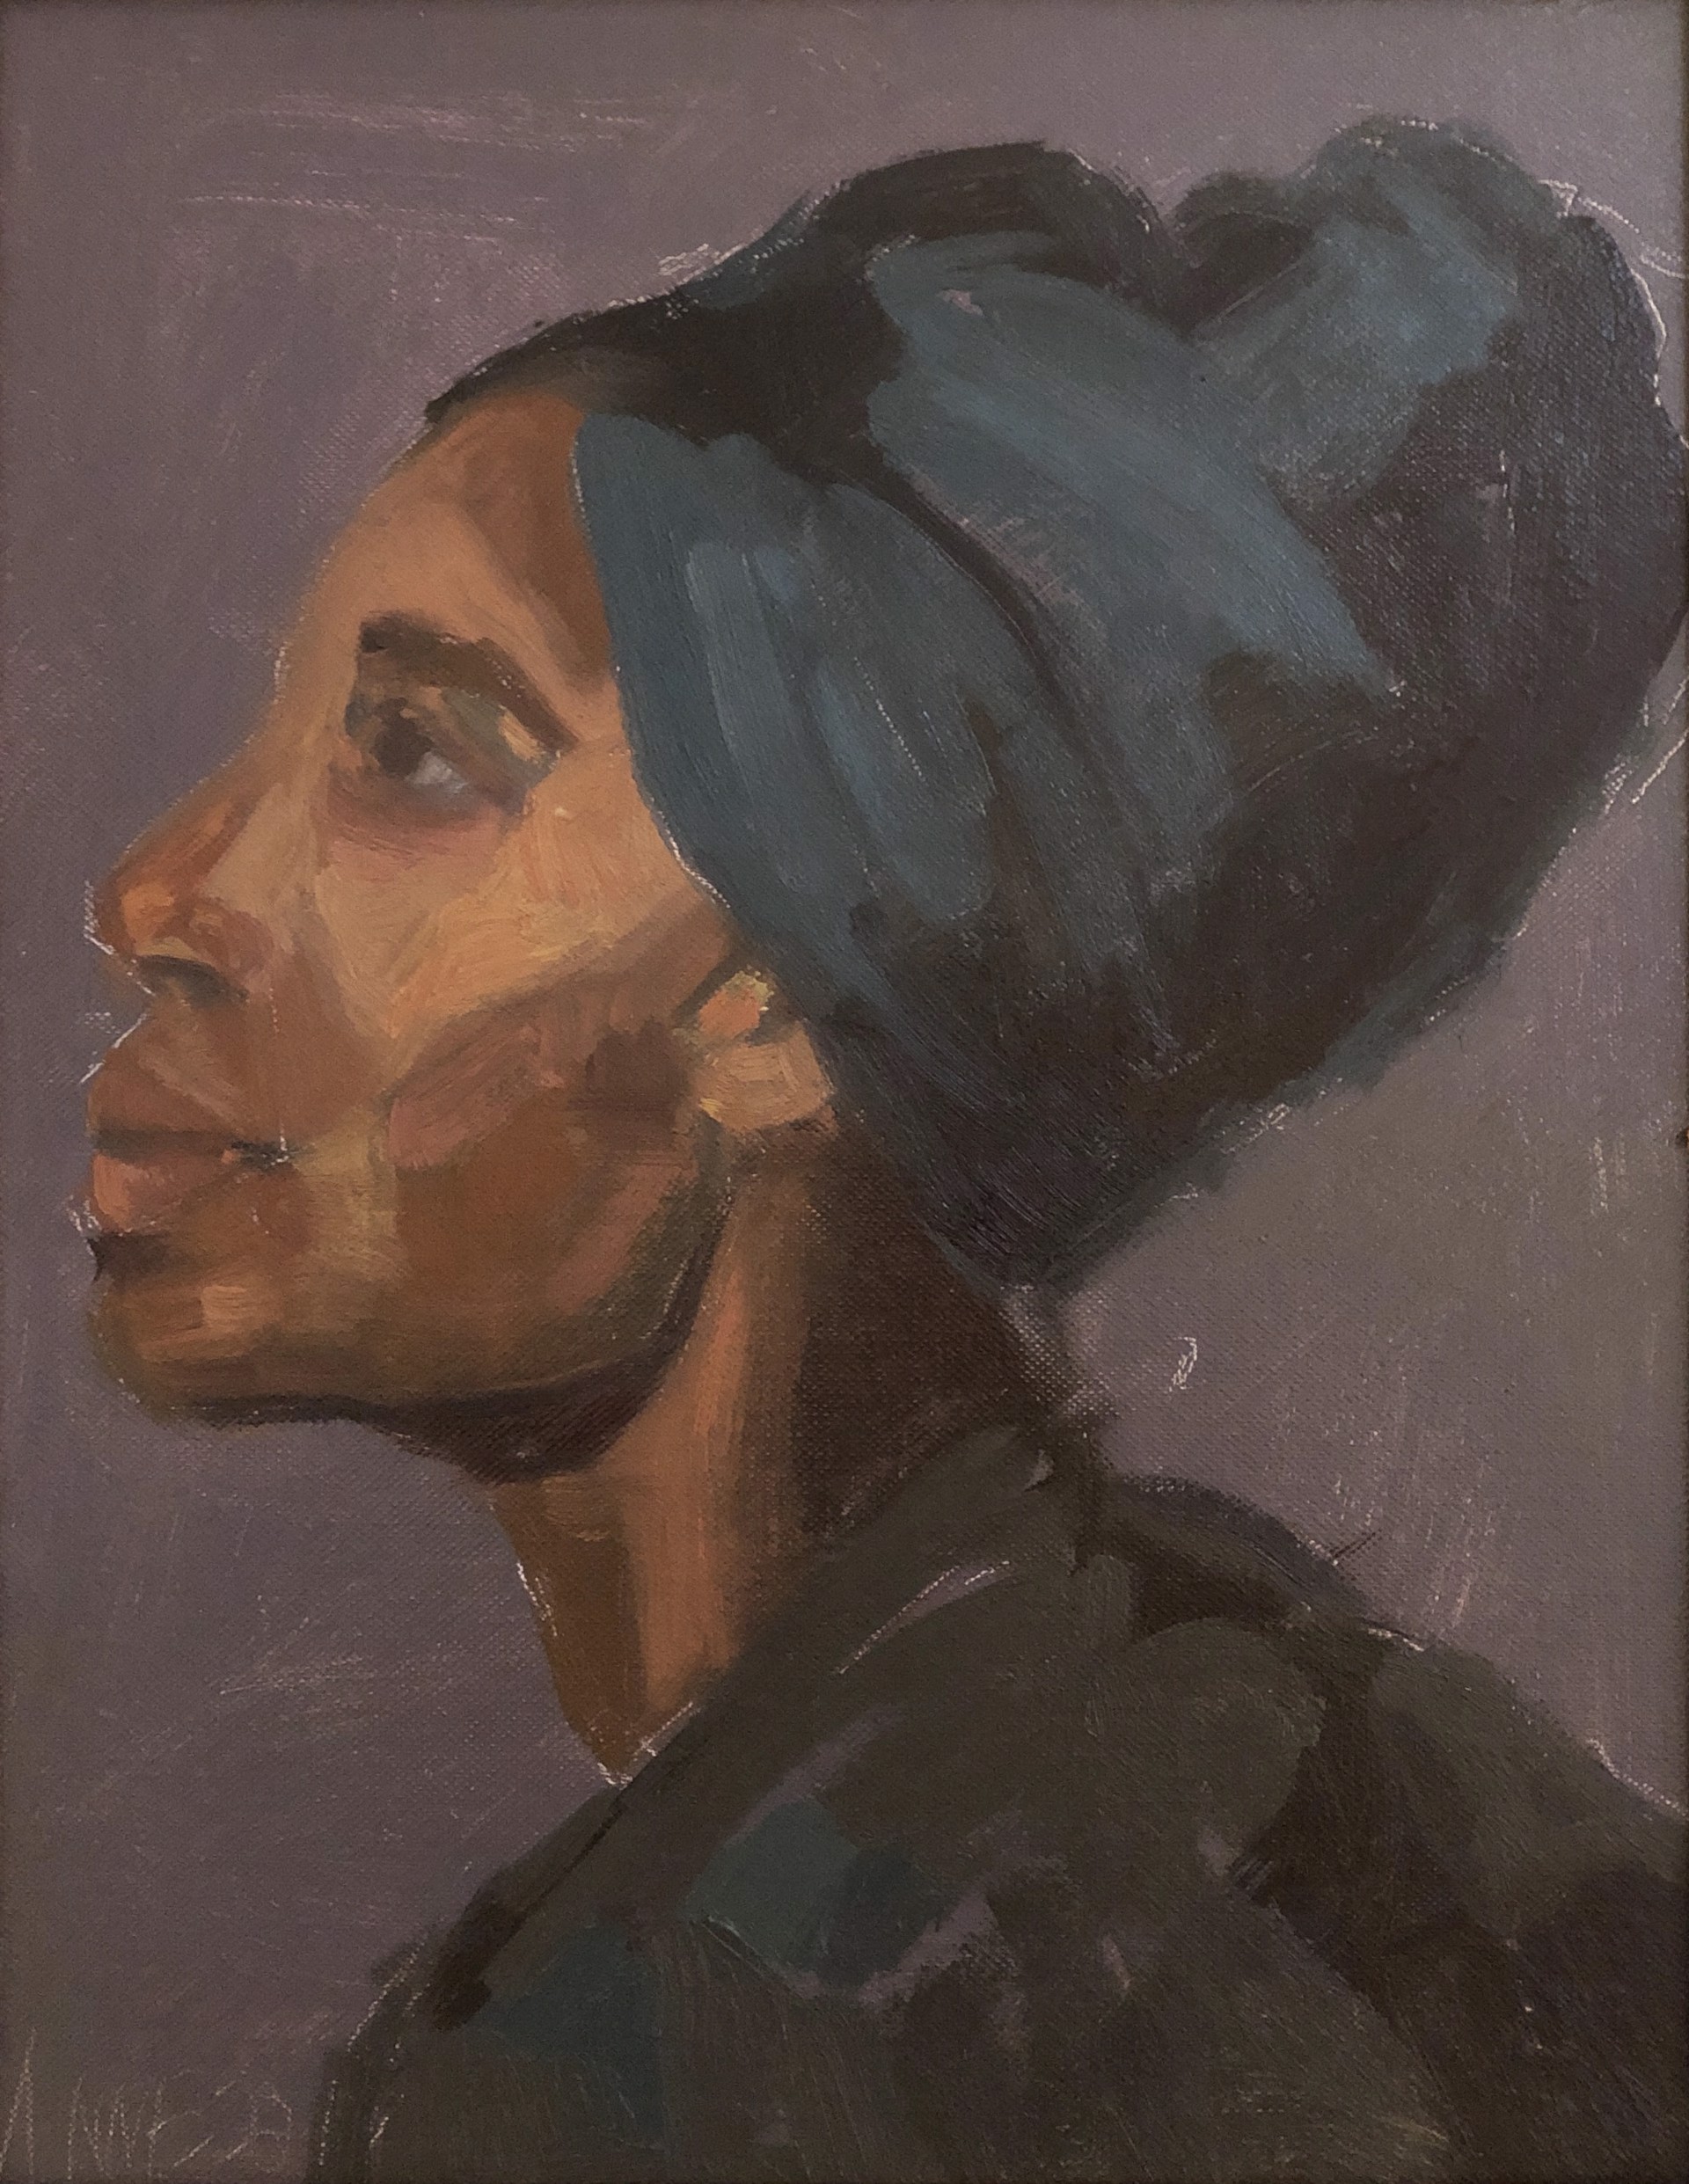 Lady with Turquoise Turban by Anne Darby Parker